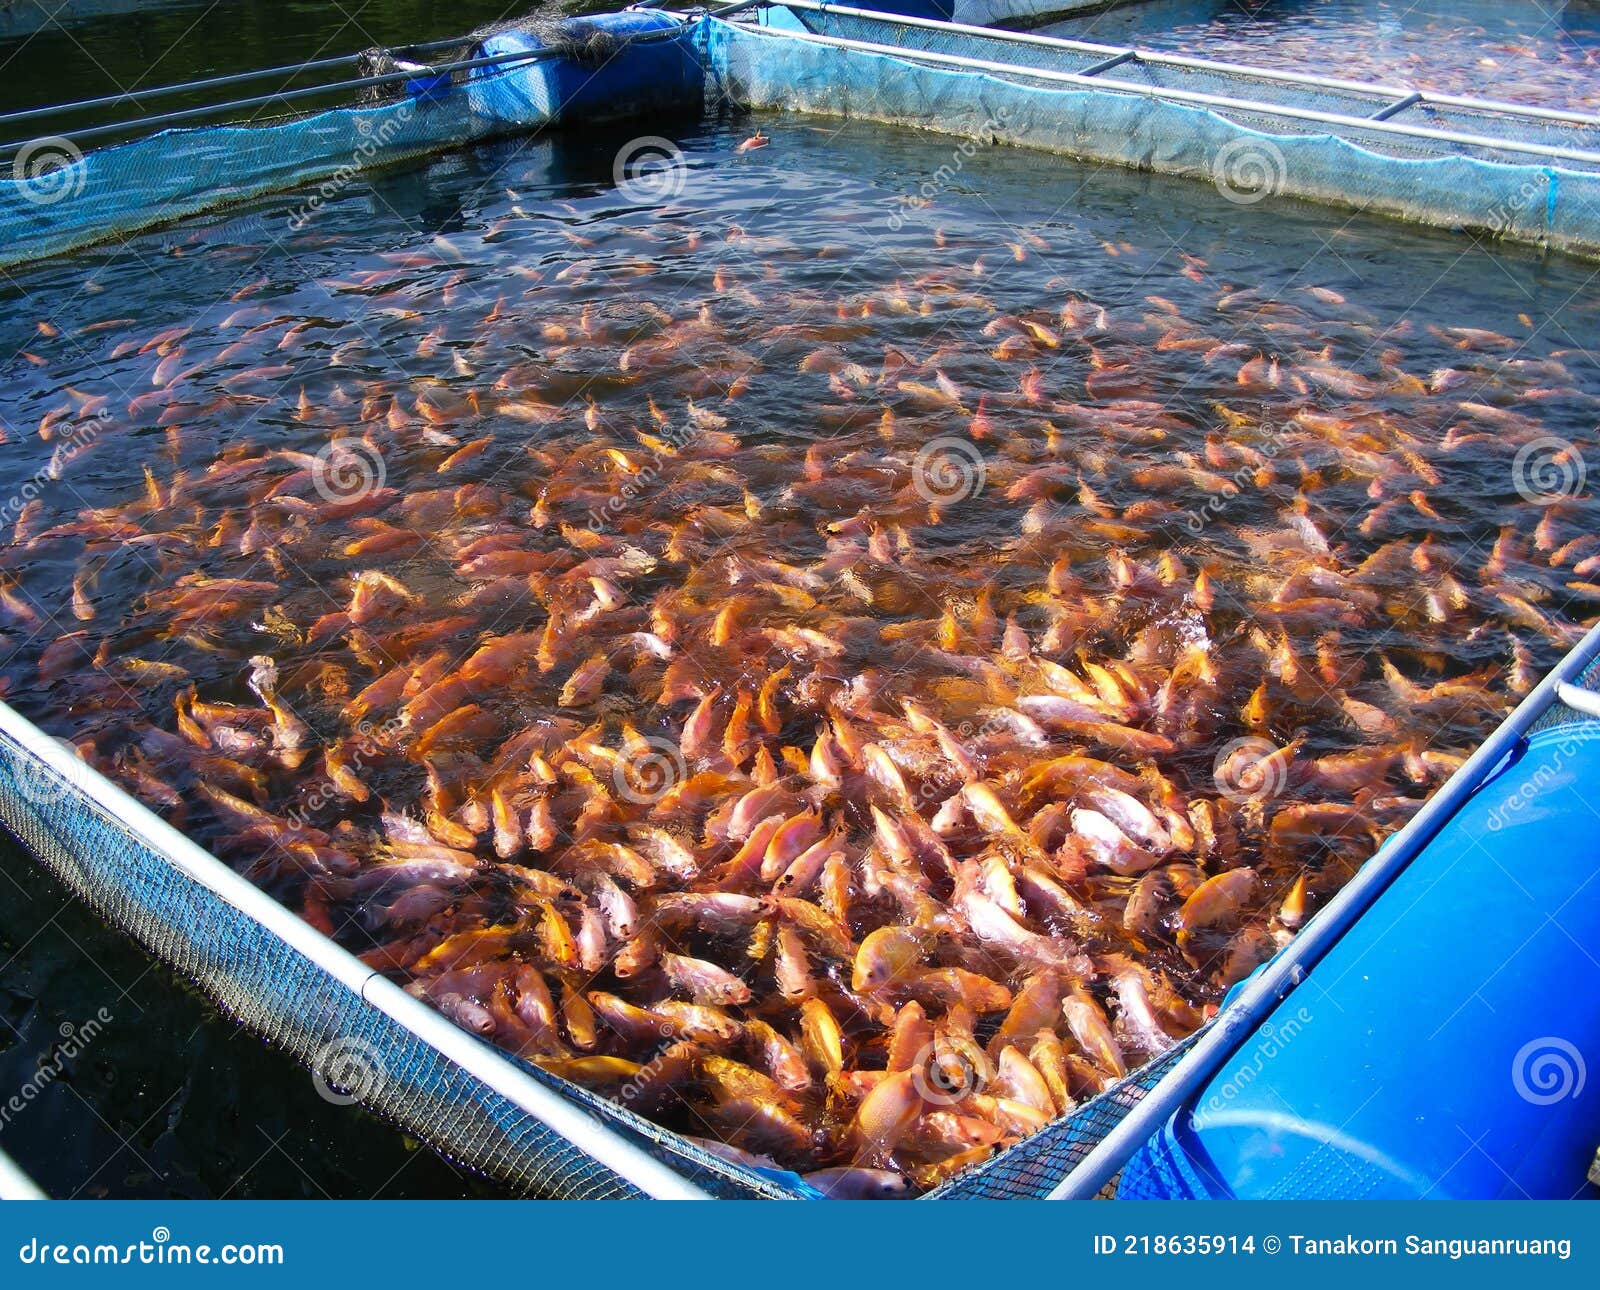 The Red Tilapia Fish in Cage Culture Stock Photo - Image of